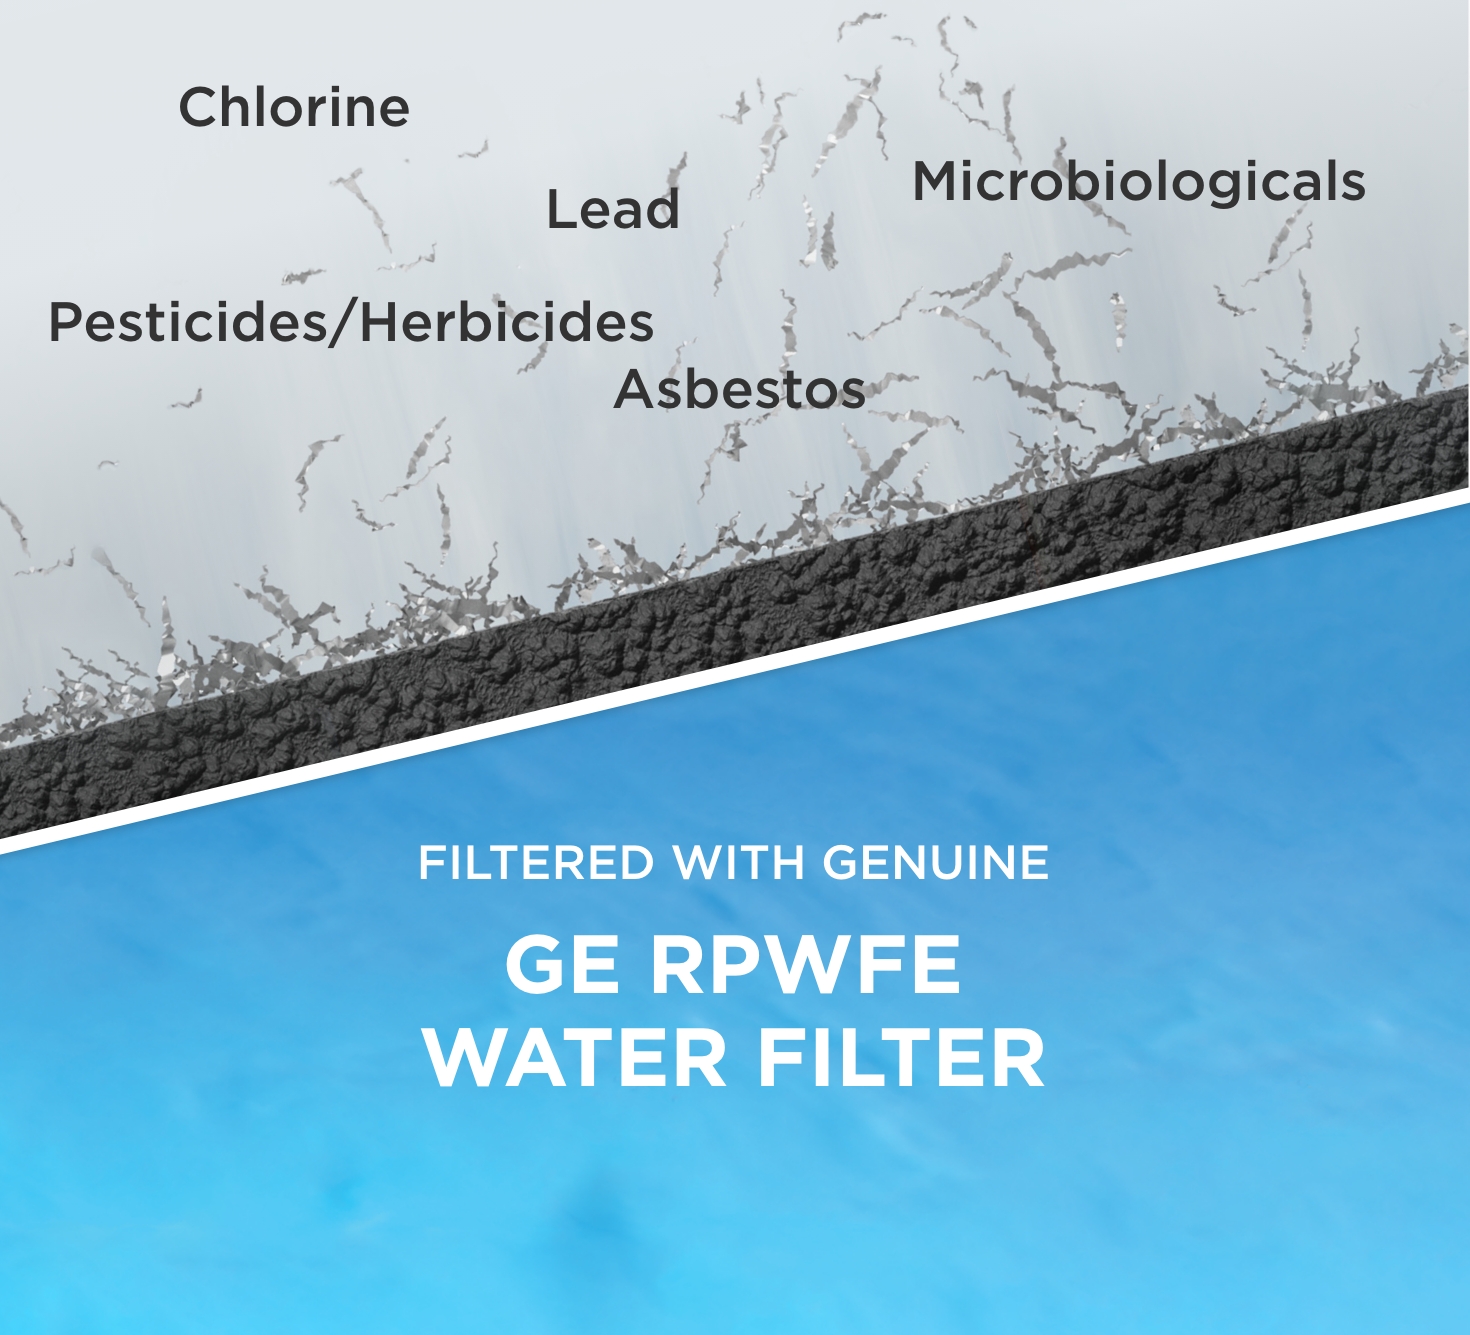 GE RQWFE Water Filter Reduces 50+ impurites including 99% of Lead